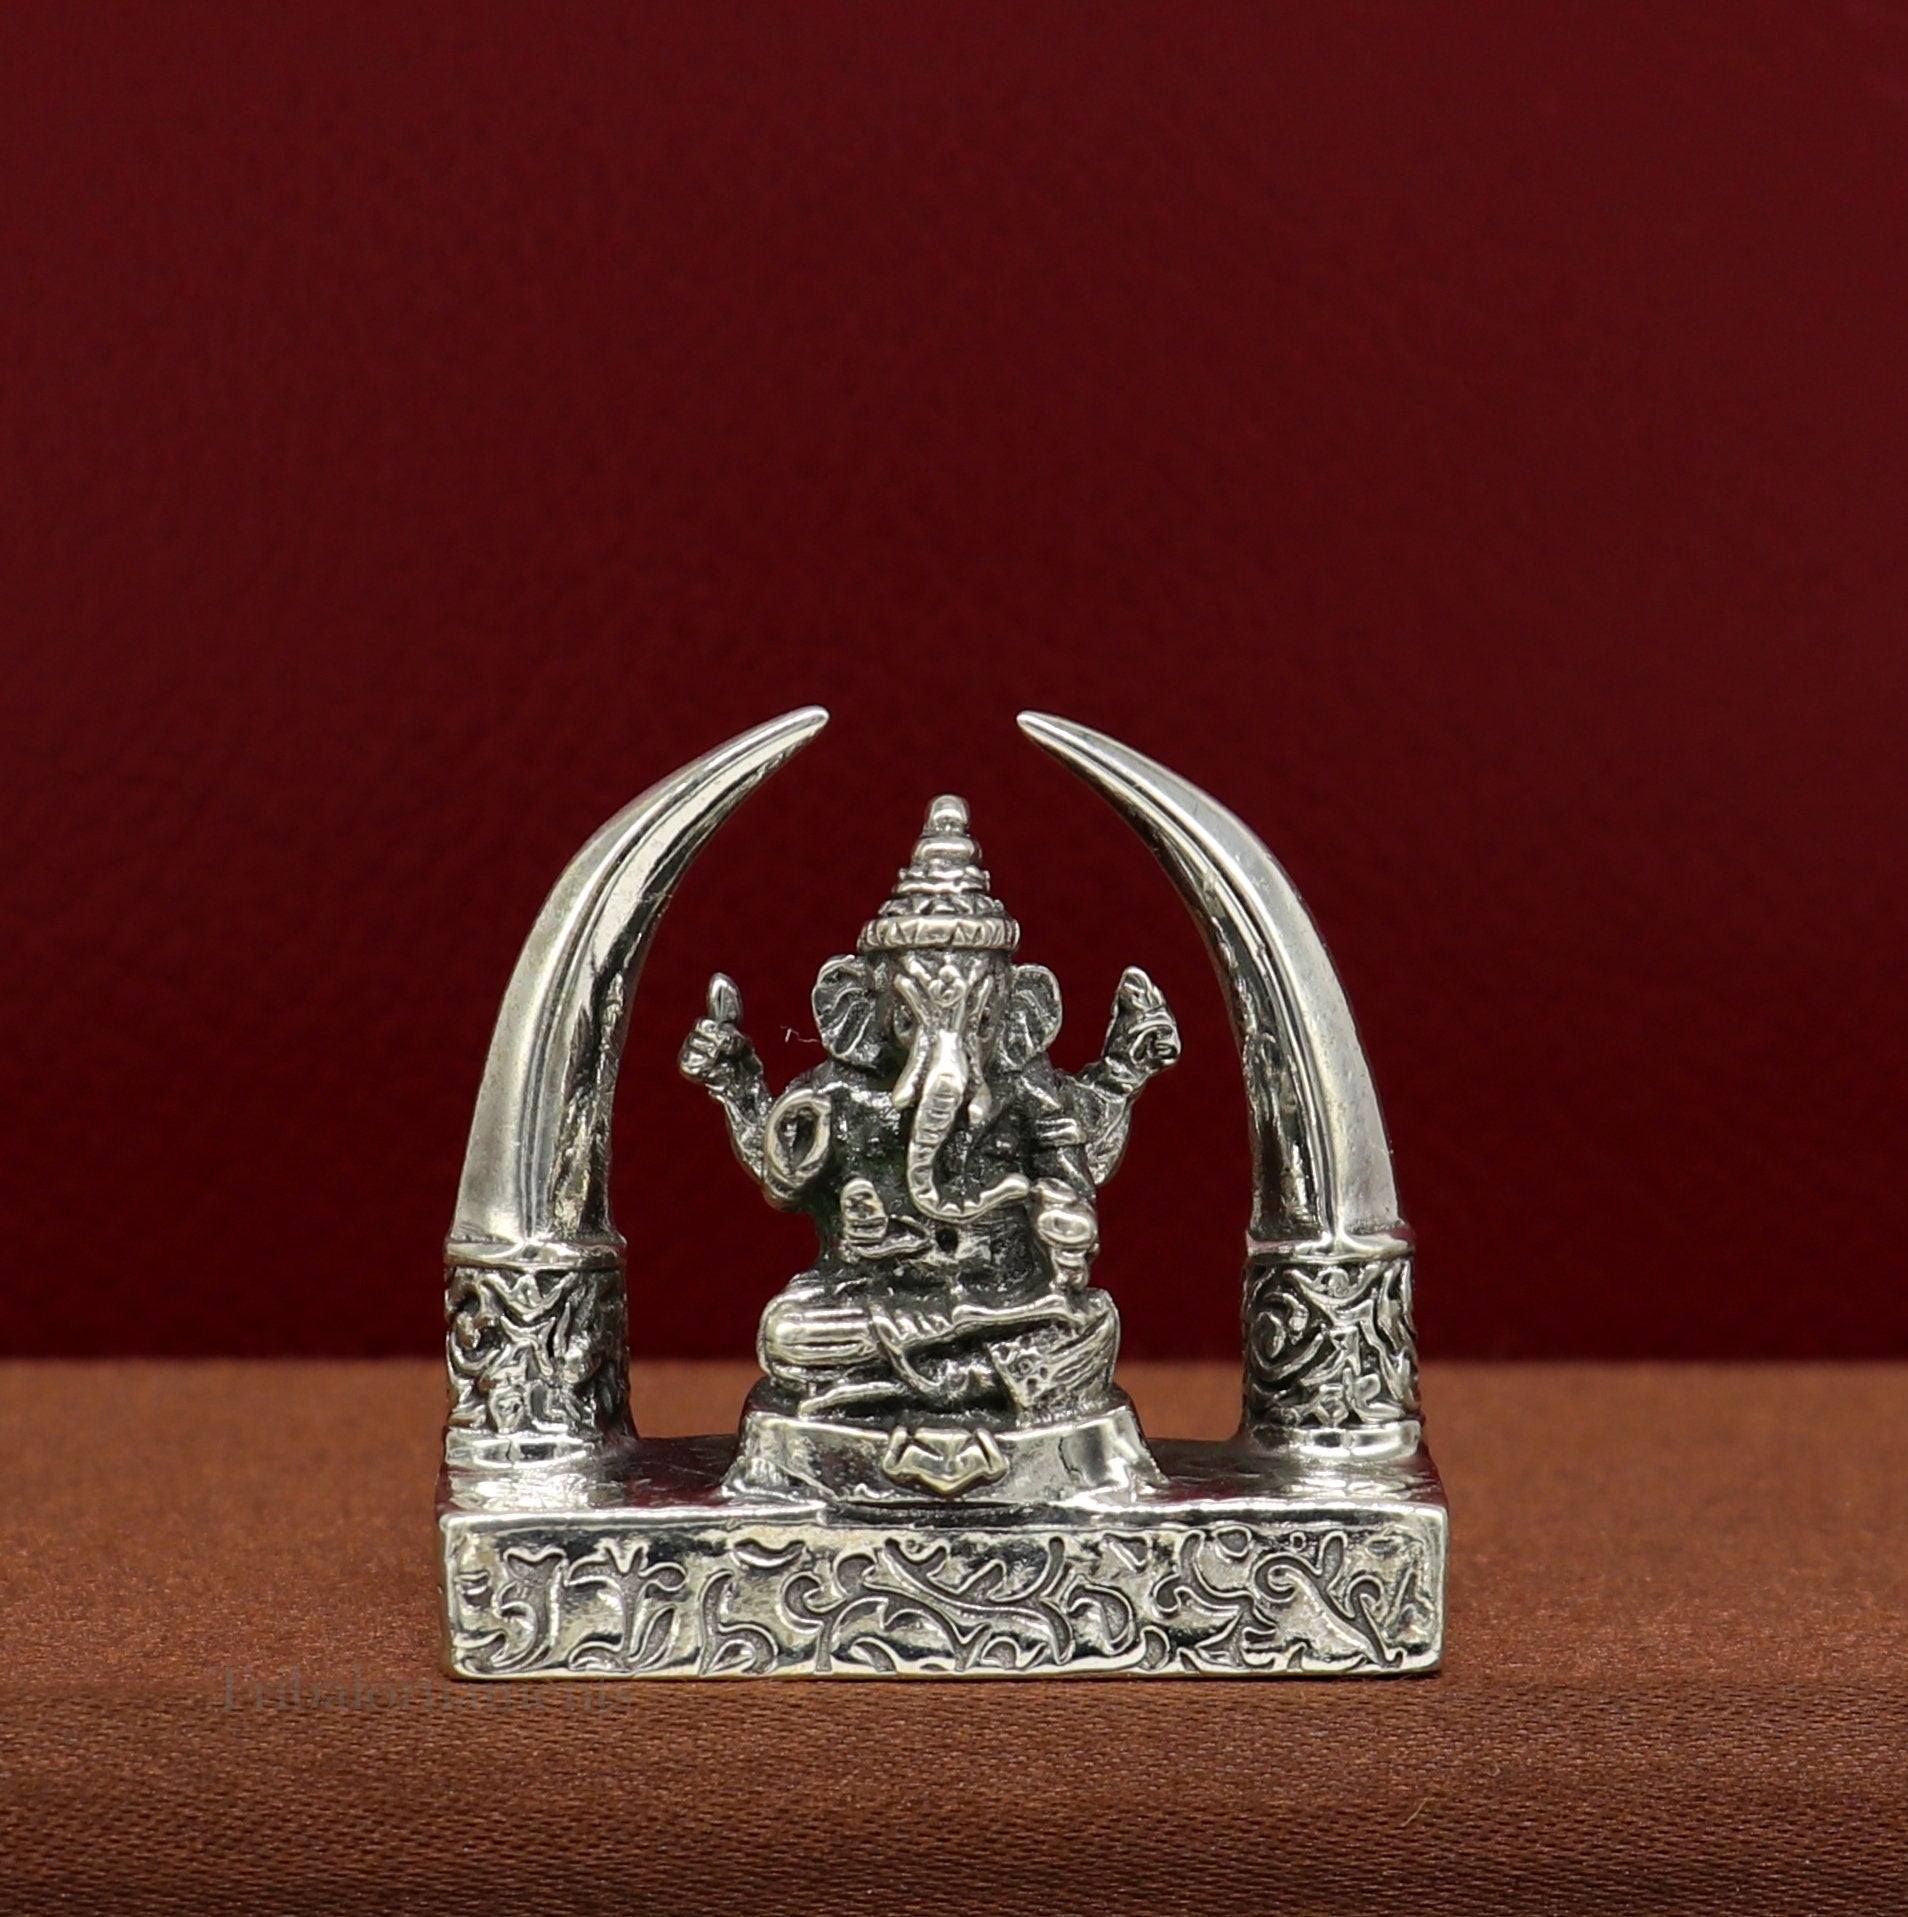 925 Sterling silver Idol lord Ganesha, Pooja Articles, Indian Silver Idols, handcrafted Ganesh statue sculpture Diwali puja gifting Art154 - TRIBAL ORNAMENTS